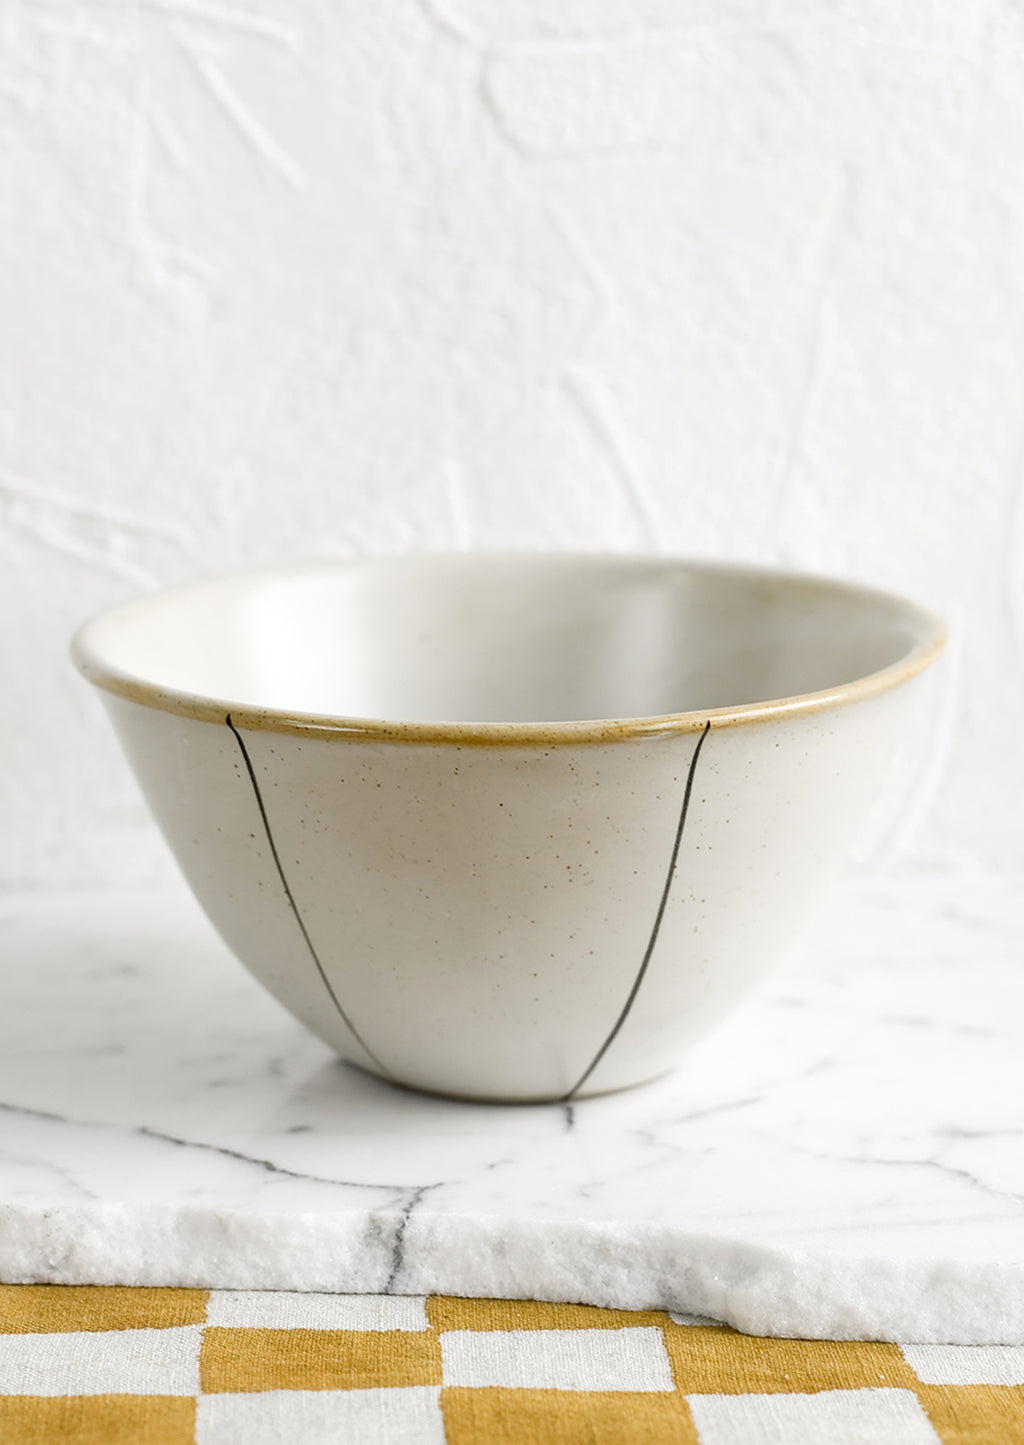 1: A ceramic bowl in white with thin black stripe detail.